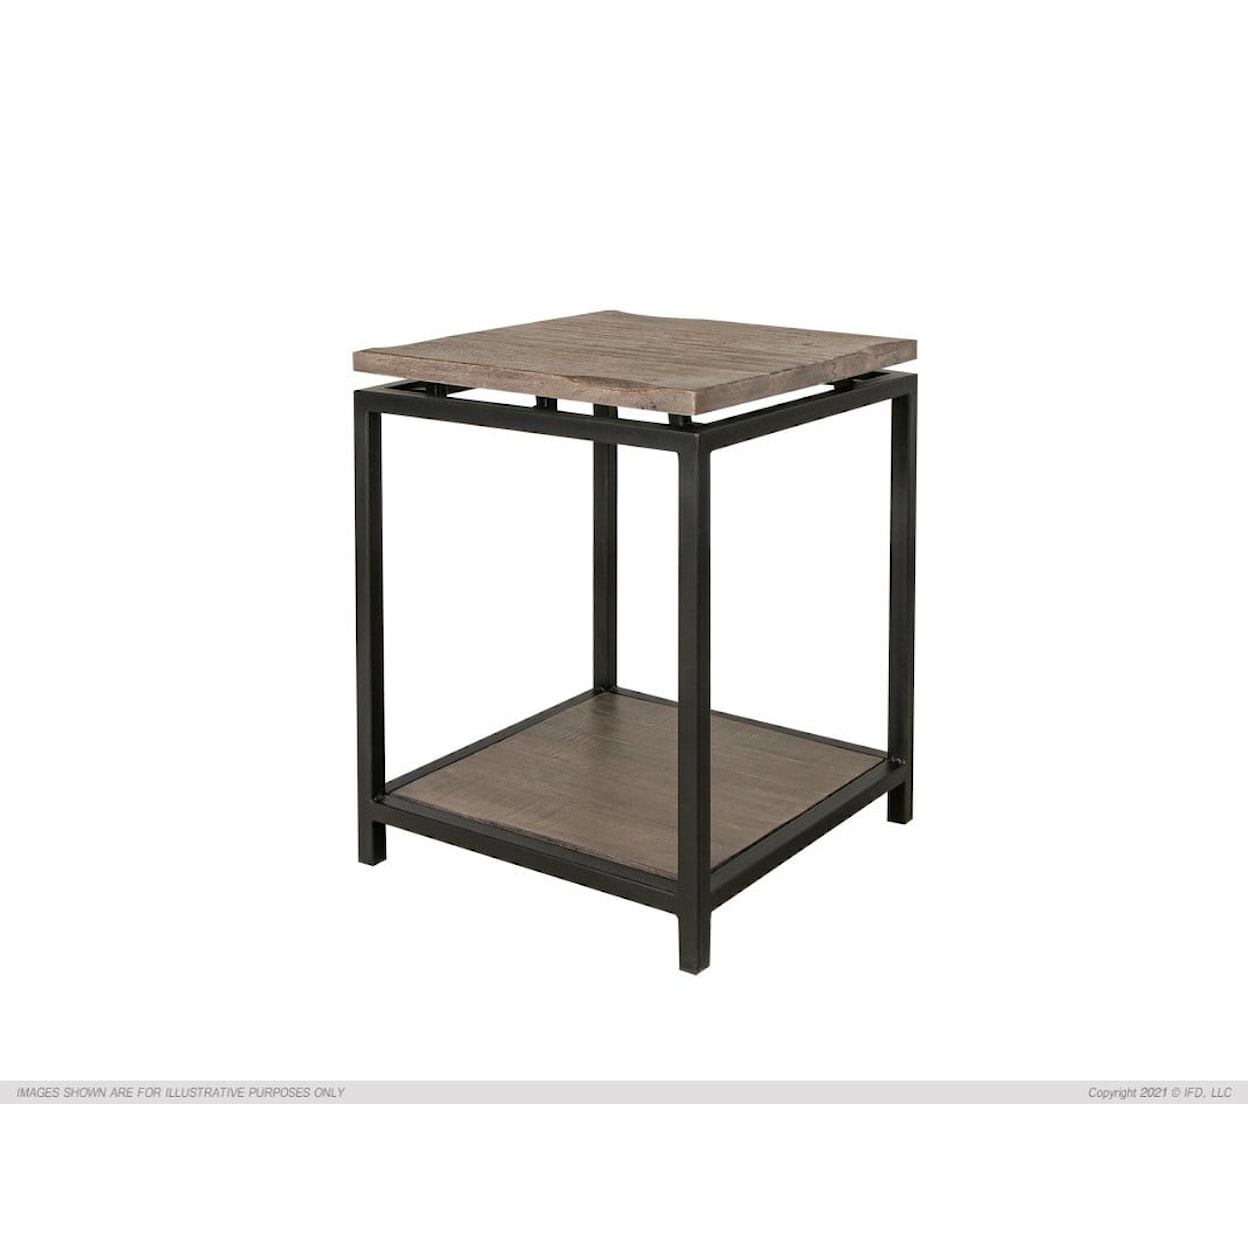 International Furniture Direct Blacksmith End Table with Shelving